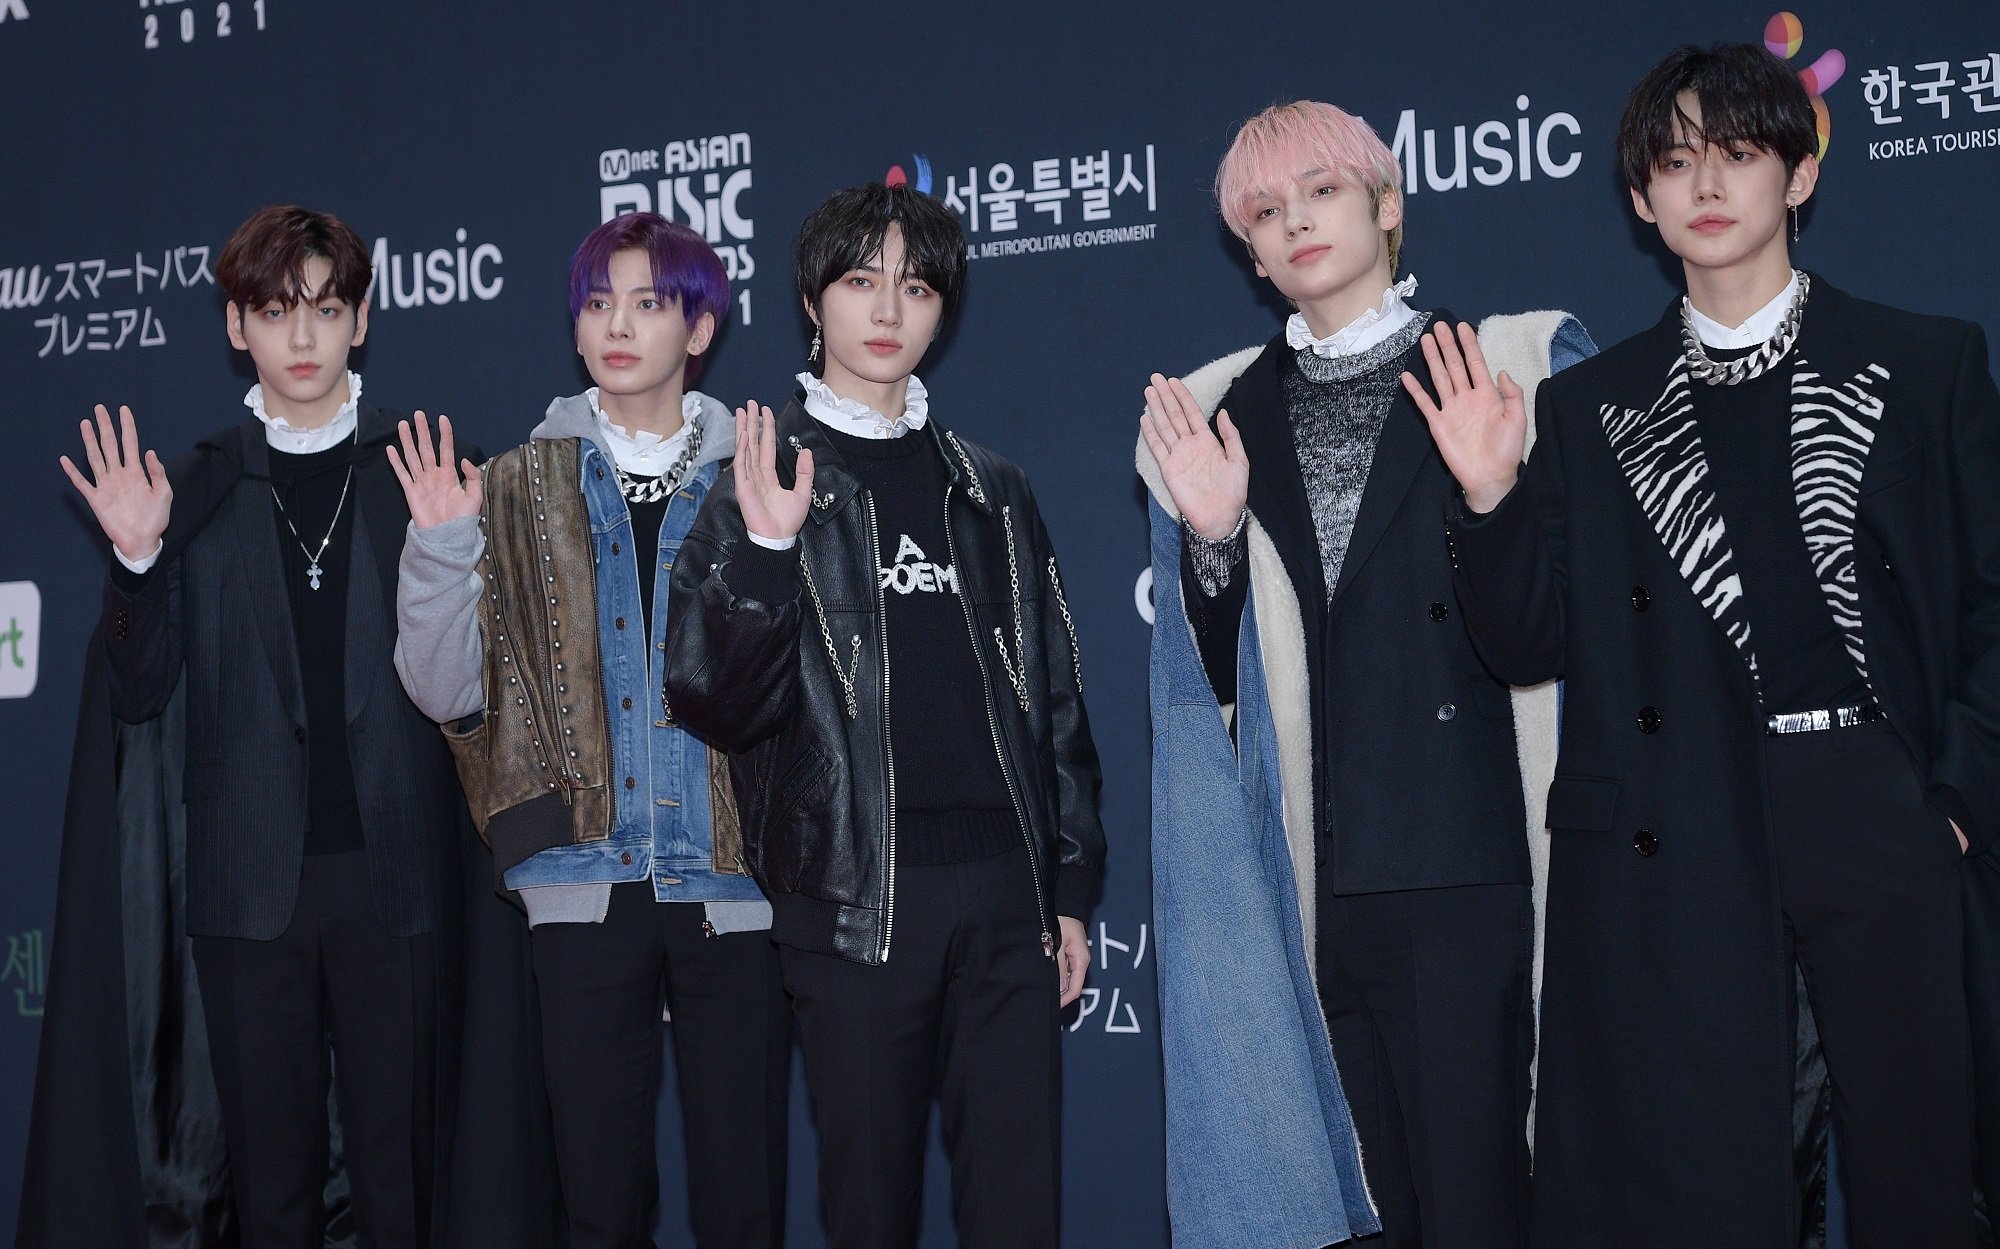 The members of TXT attend the 2021 Mnet Asian Music Awards